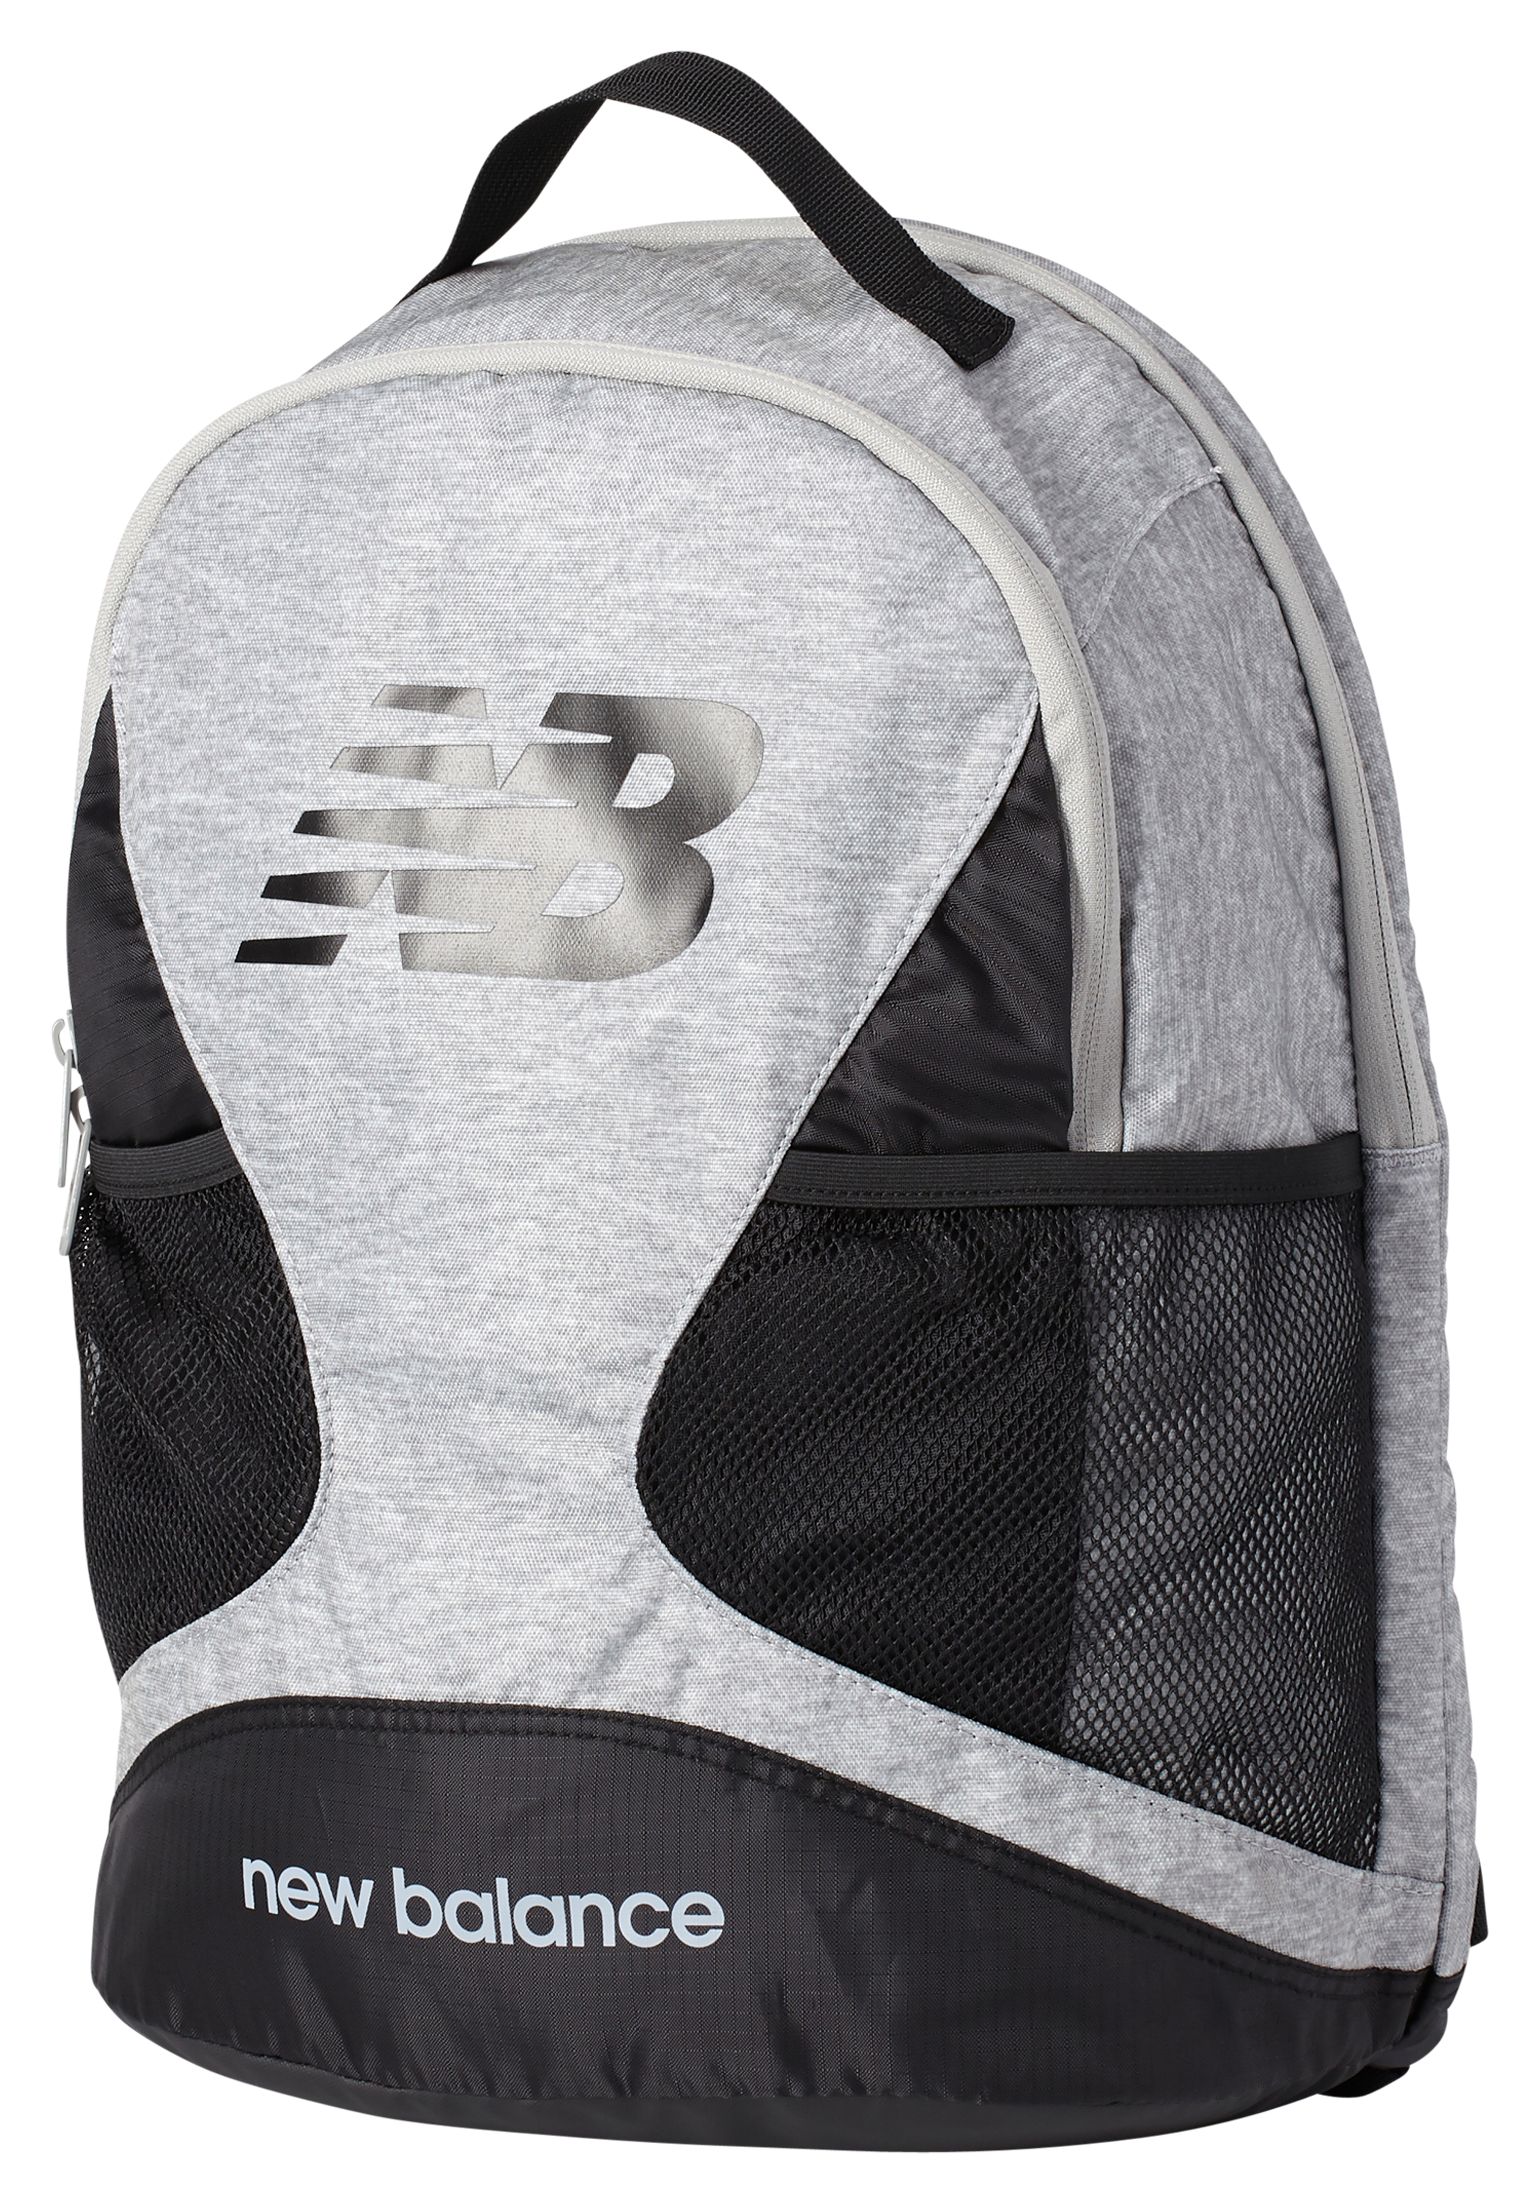 new balance players backpack